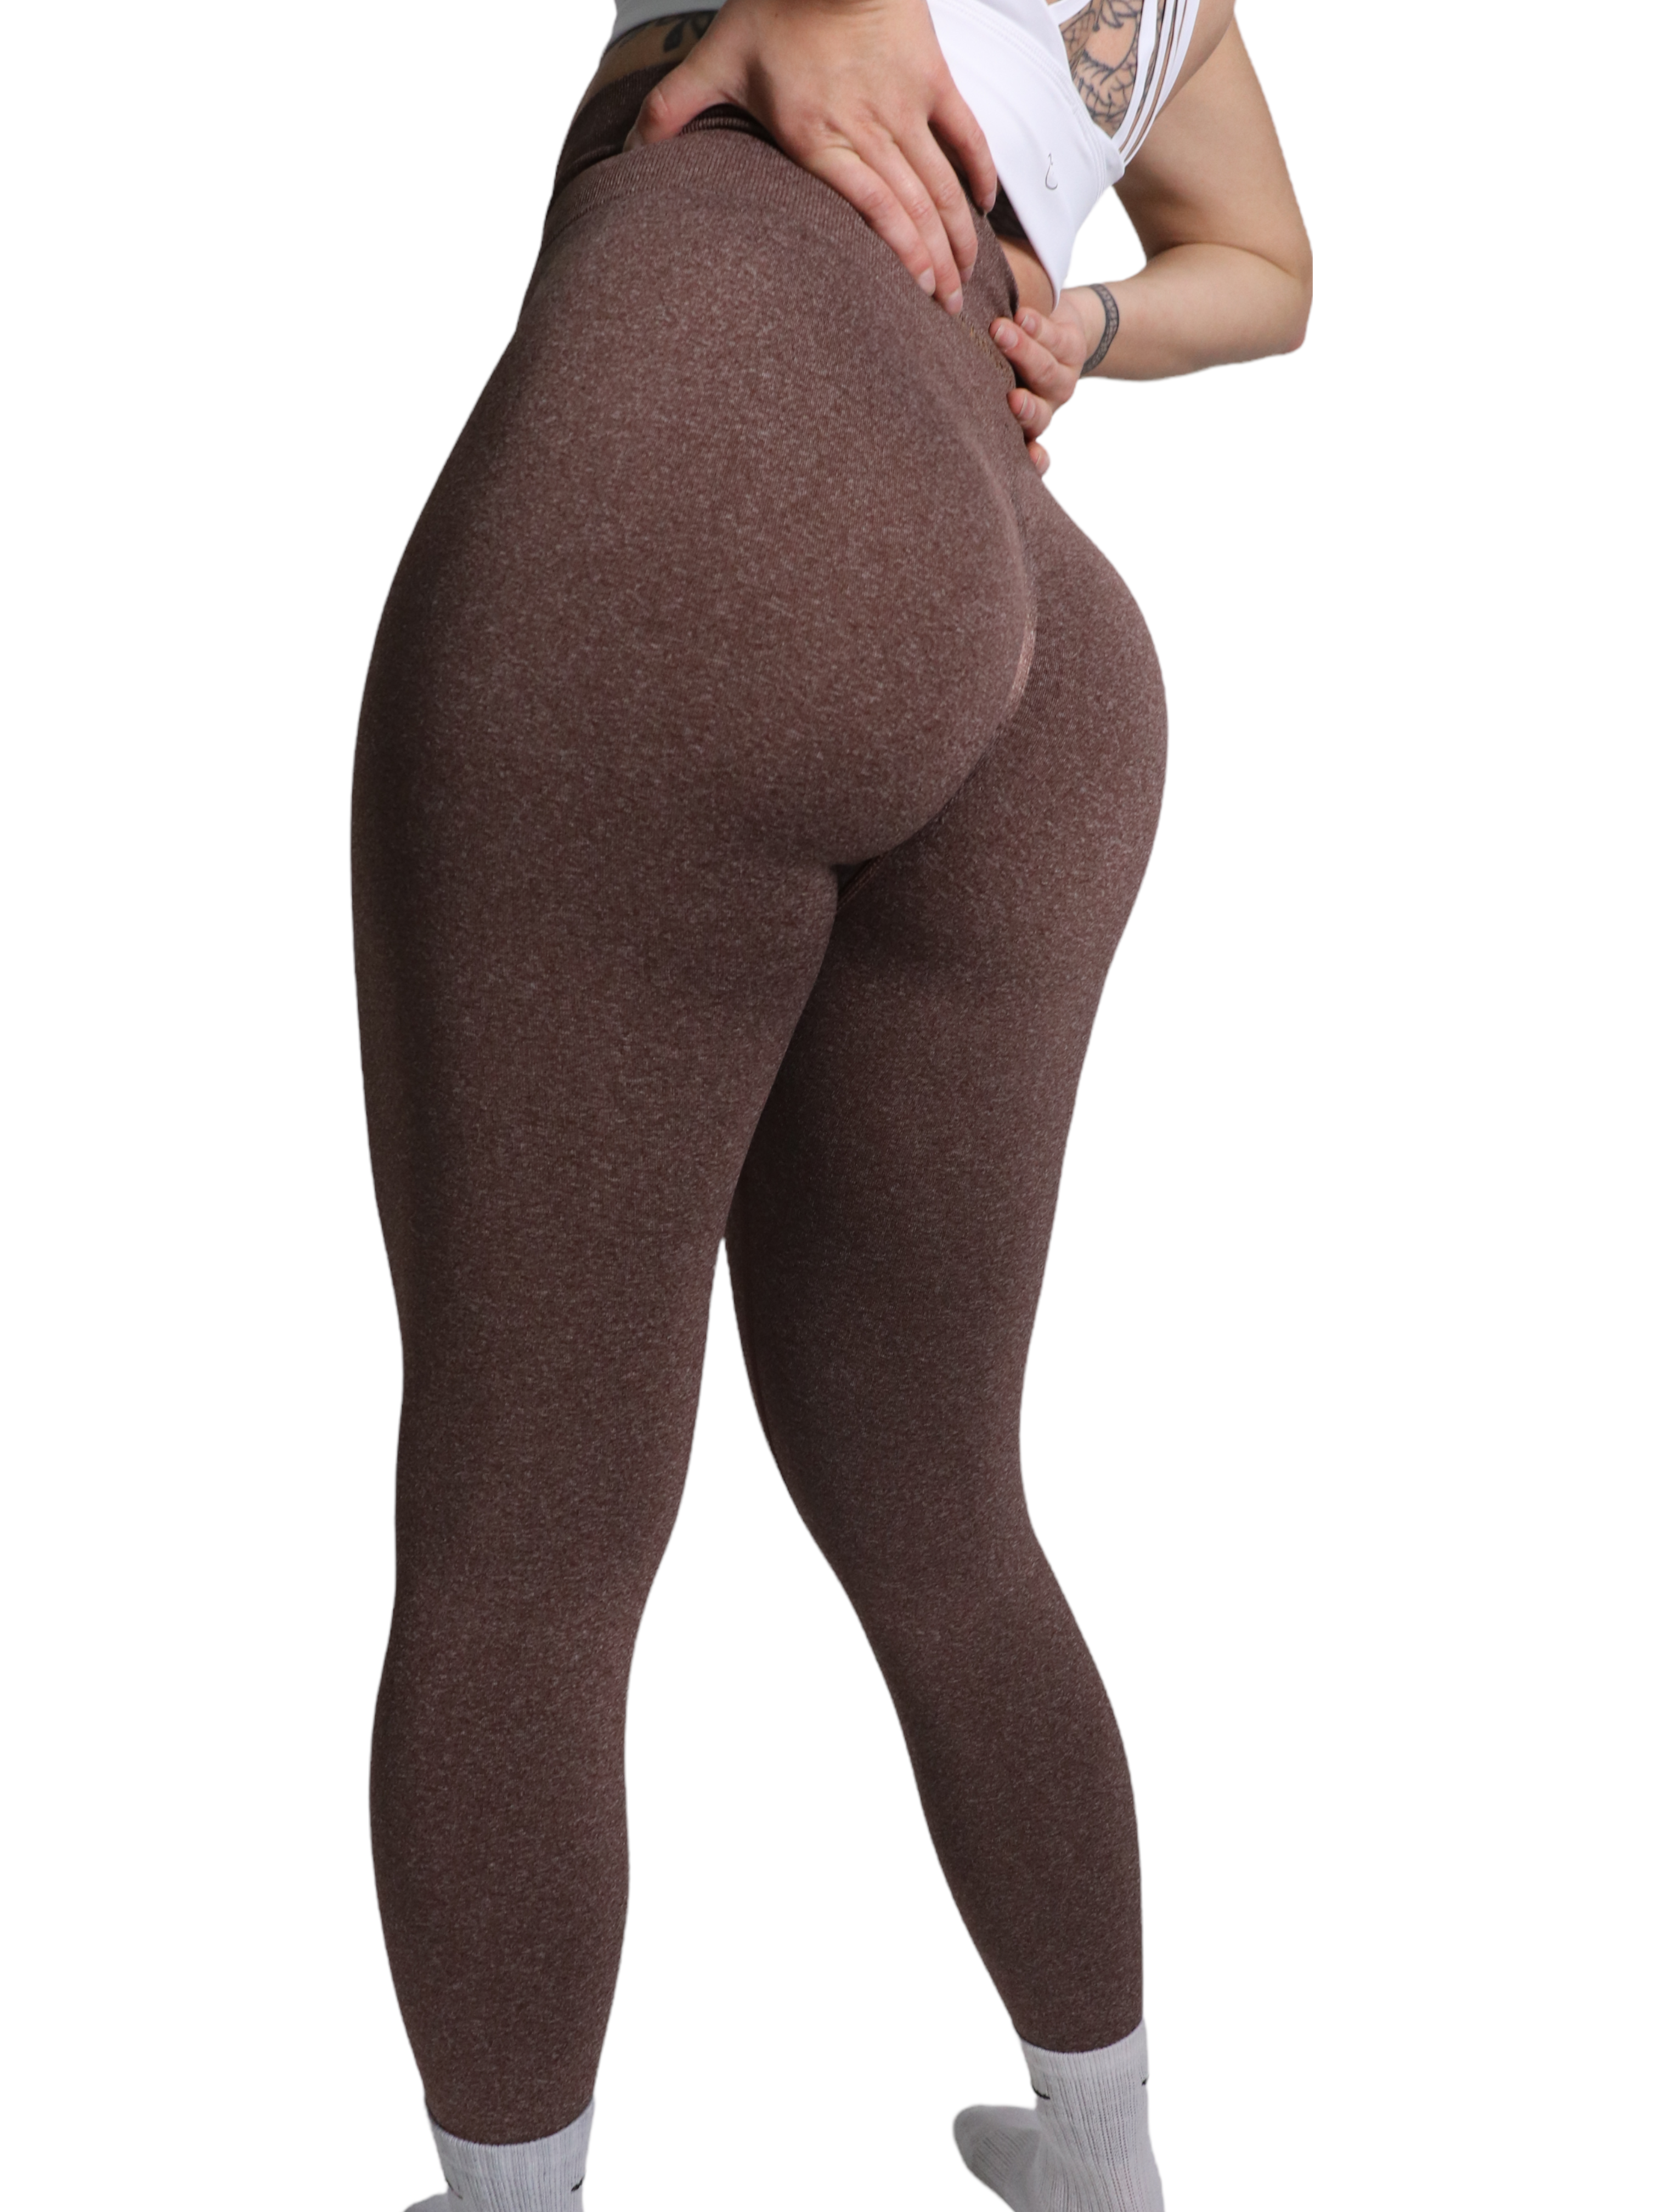 We Are Fit Peach Scrunch Tights - WE ARE FIT